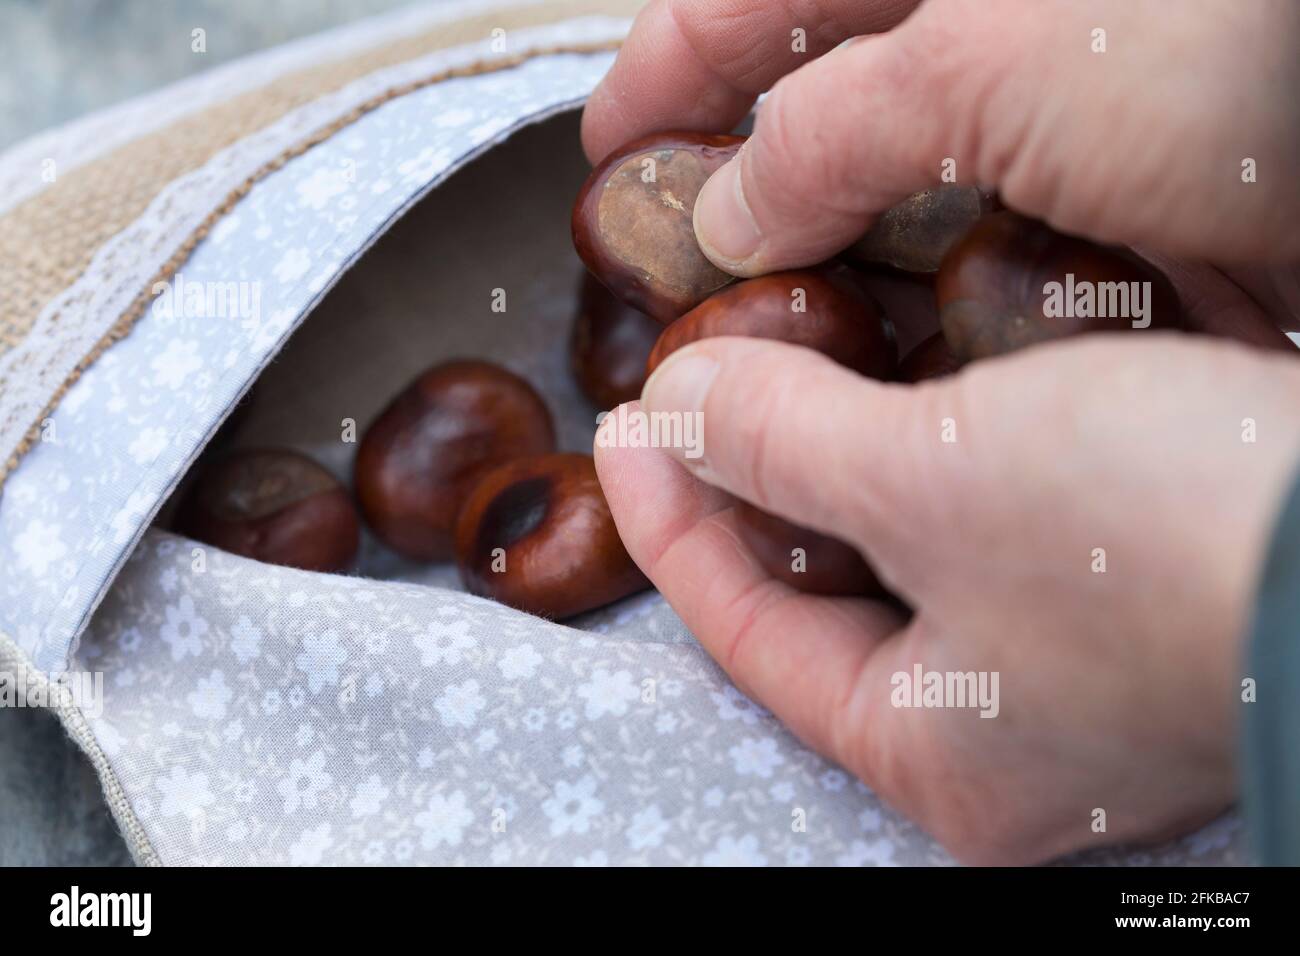 common horse chestnut (Aesculus hippocastanum), chestnuts are filled in a pillowcase, can then be heated in the oven and used as a warming pillow , Stock Photo